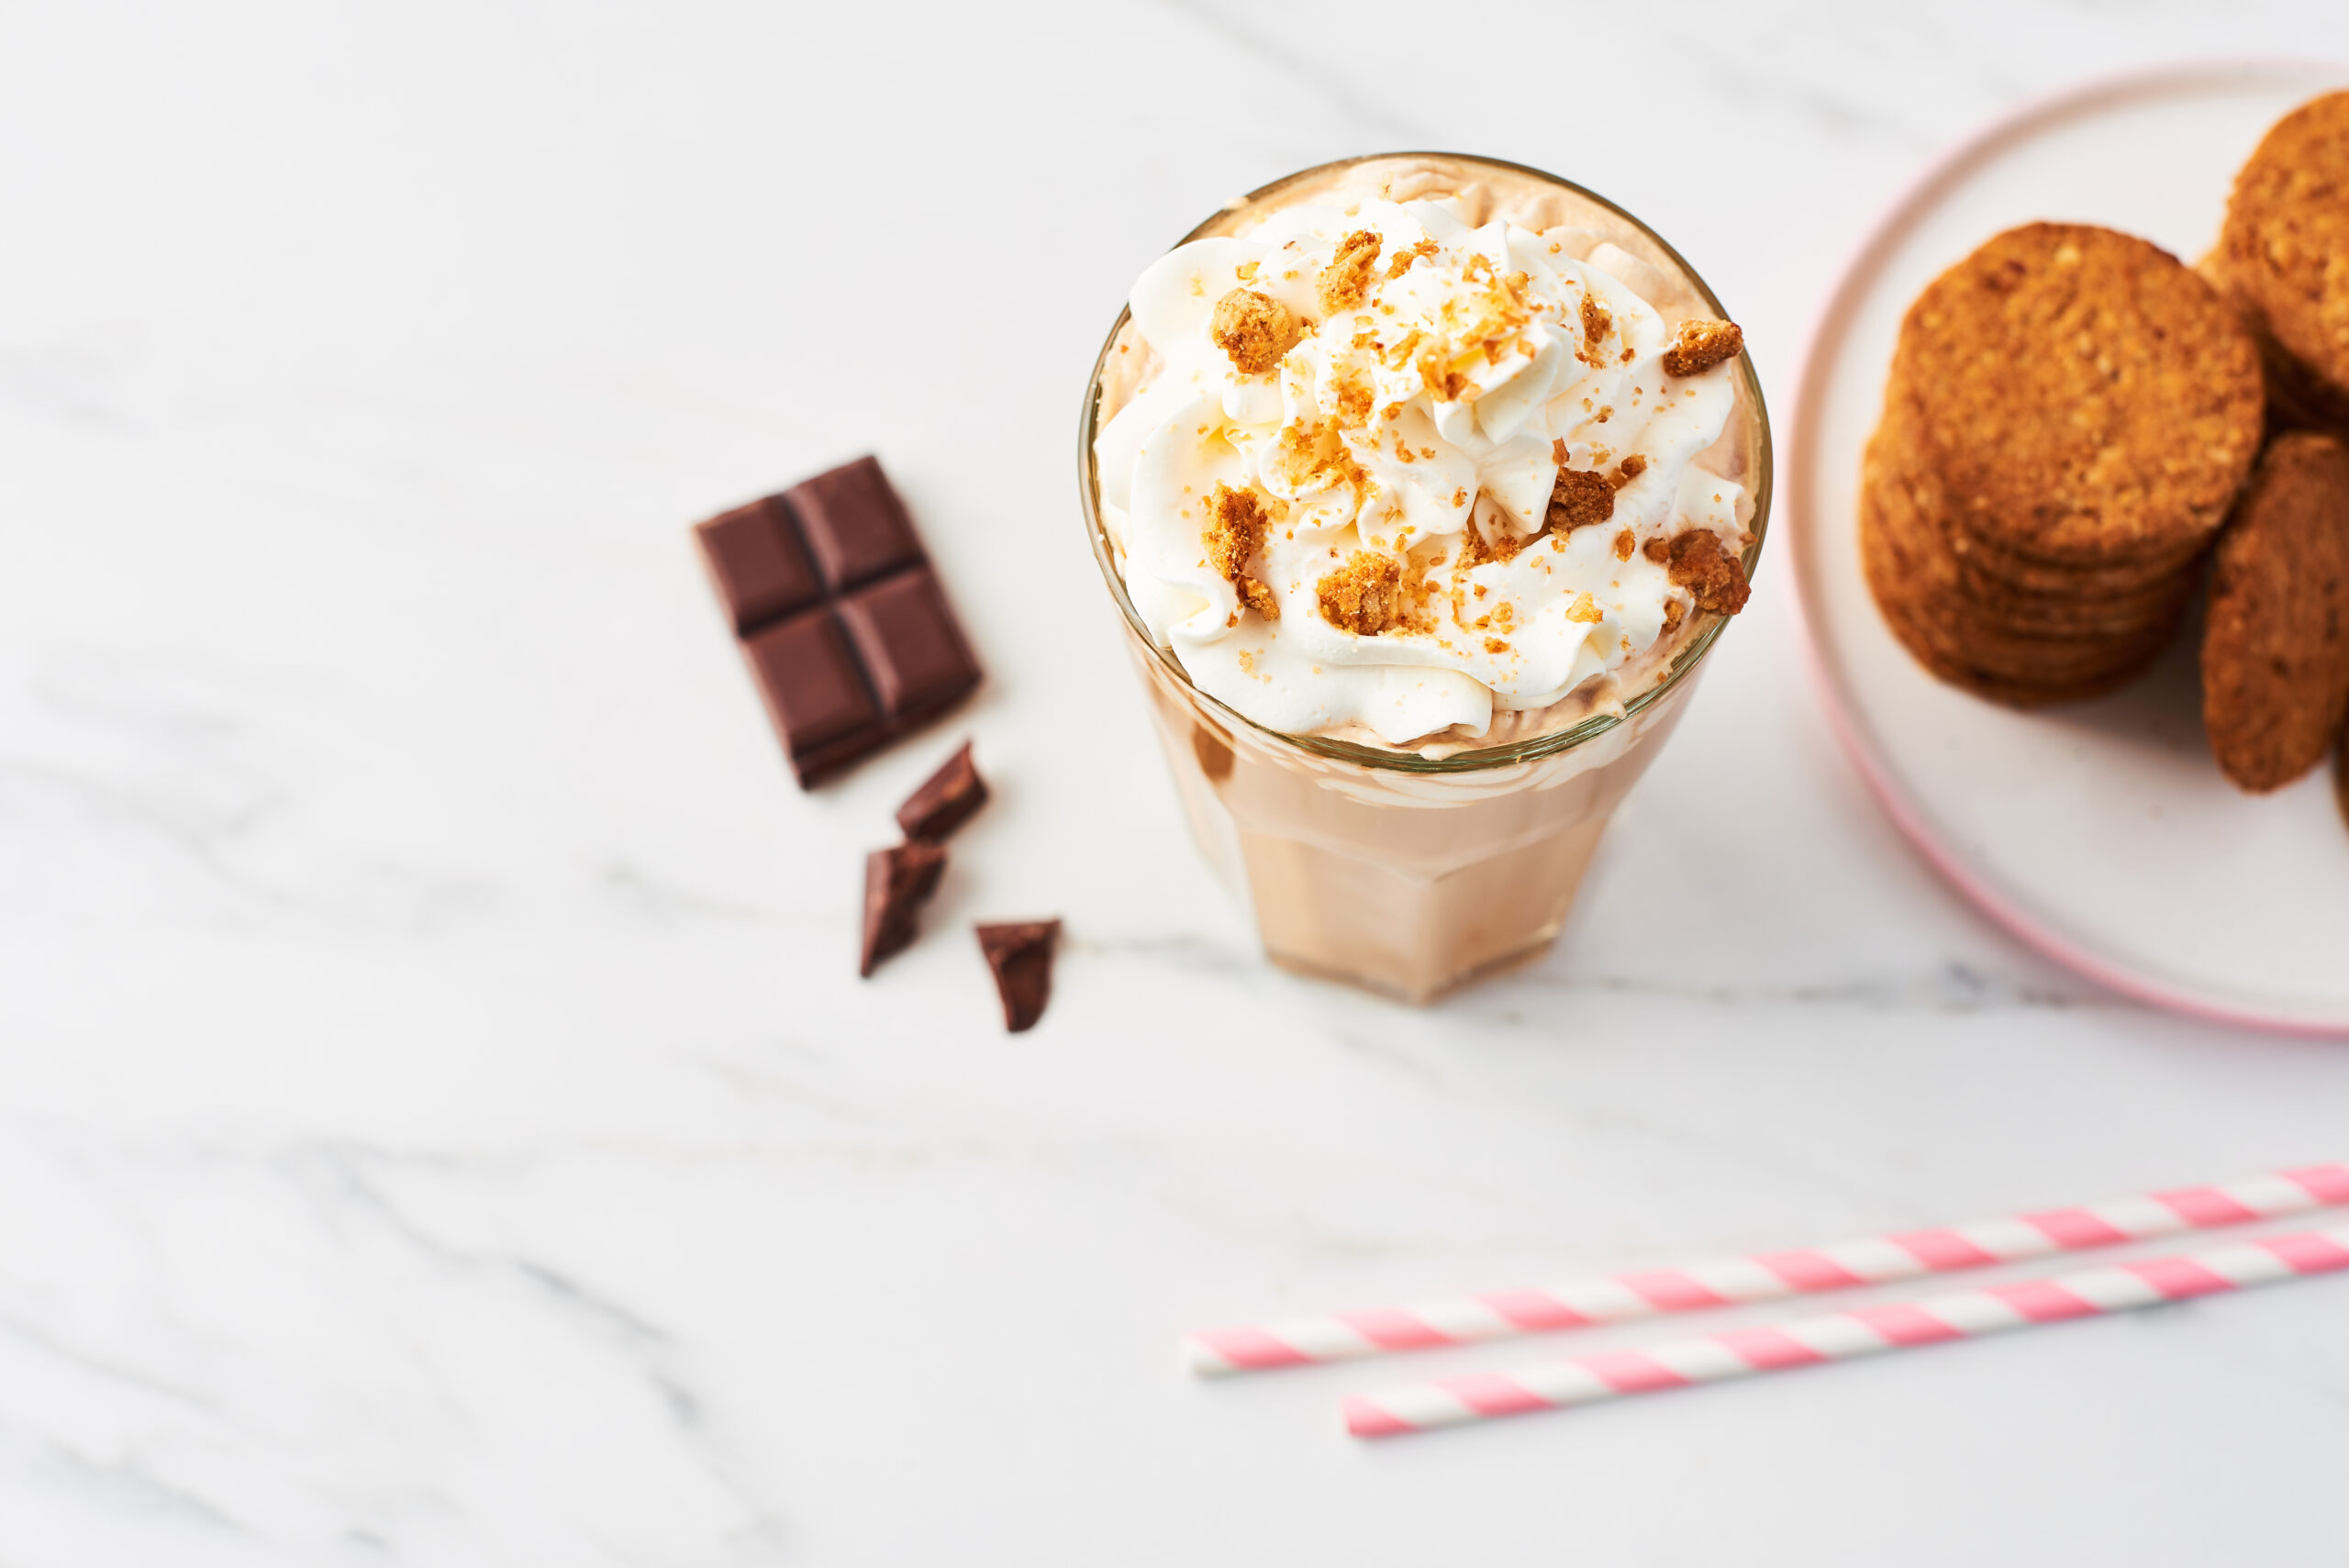 Healthy Iced Mocha Latte Recipe; a refreshing morning drink. It's bold and full of chocolate flavor, yet smooth and not too strong. It's the perfect pick-me-up with a splash of caffeine.